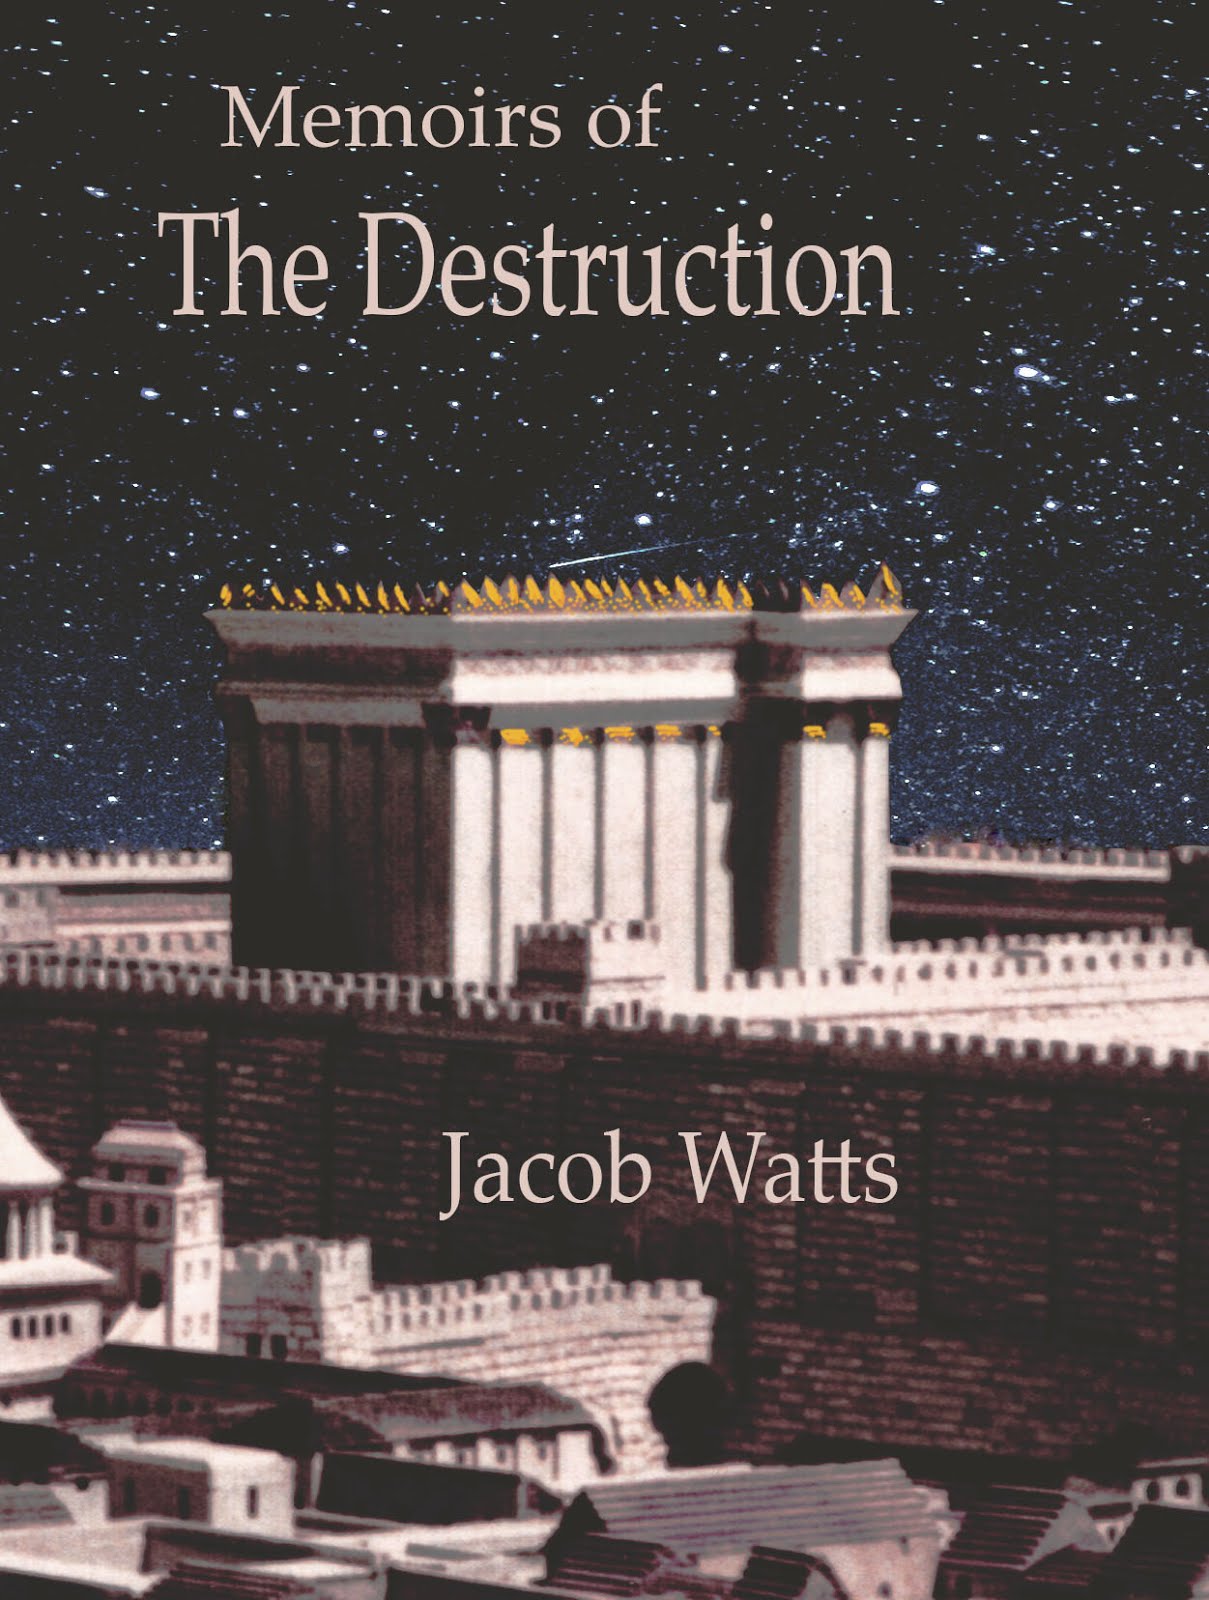 Novel About the First-Century Jewish Revolt Against Rome